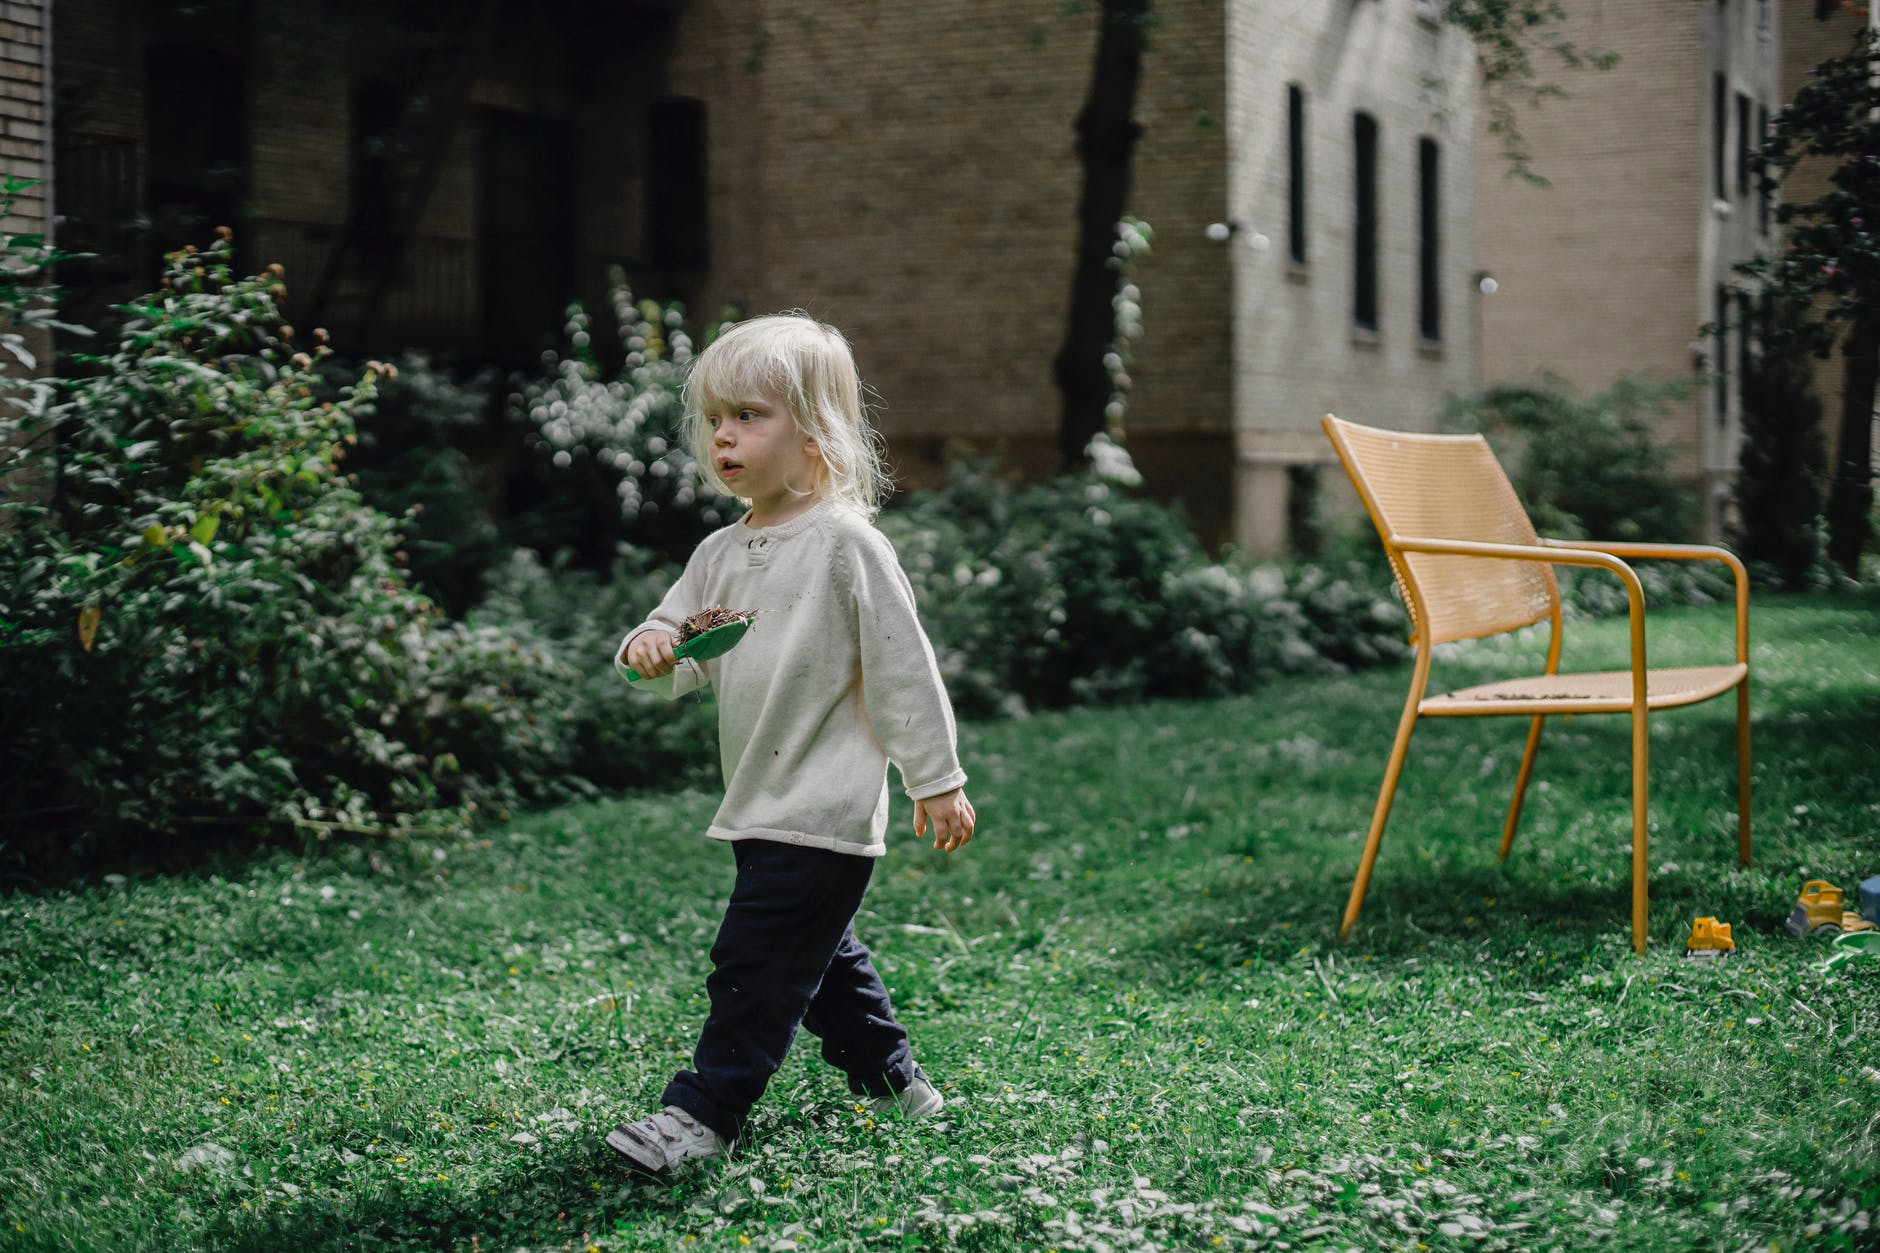 A little boy in the garden who looked just like him. | Source: Pexels